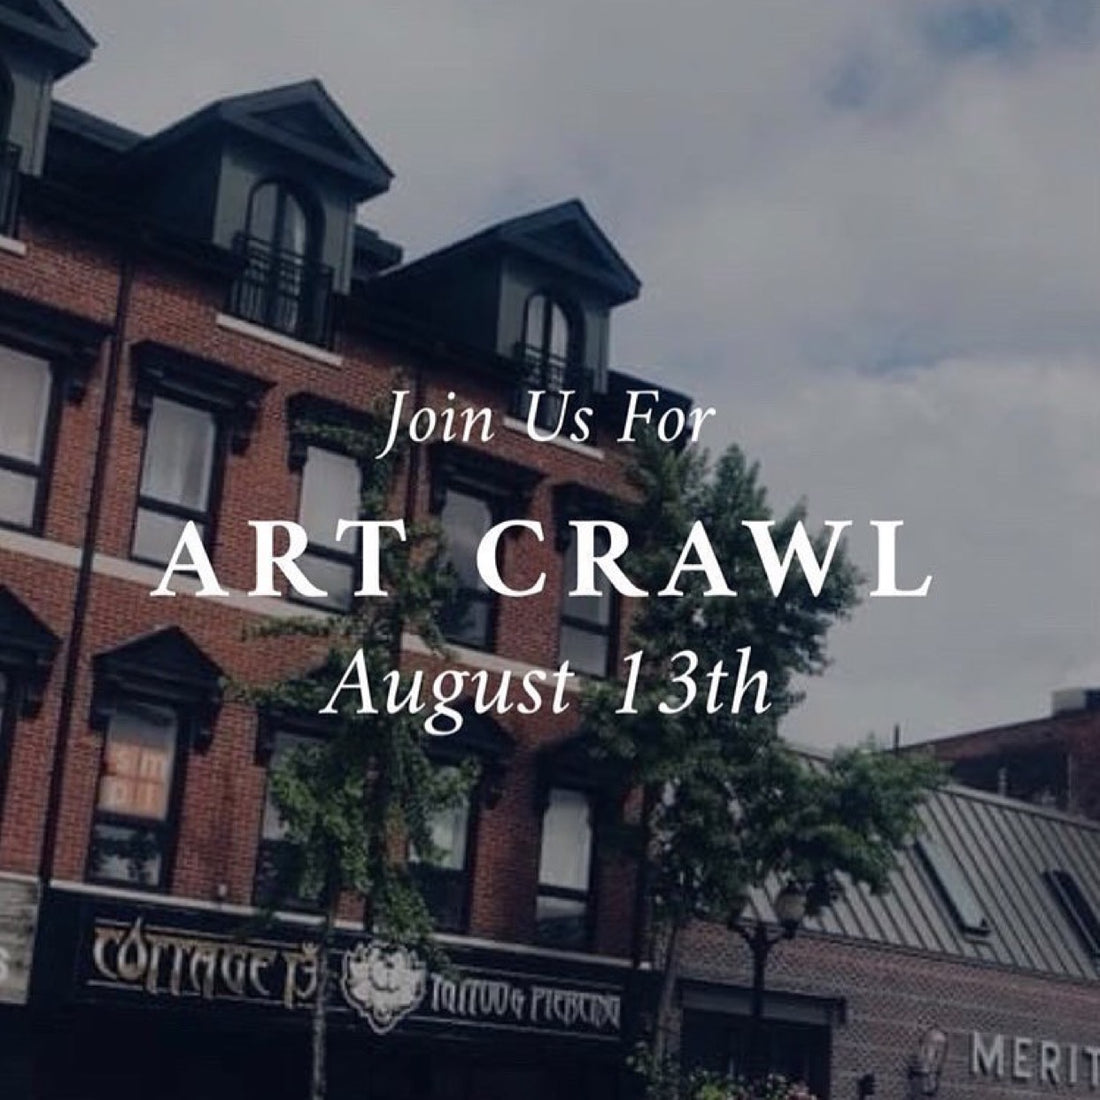 Hamilton’s Art Crawl ready to rise again. But is this ‘organic’ event good for everyone?